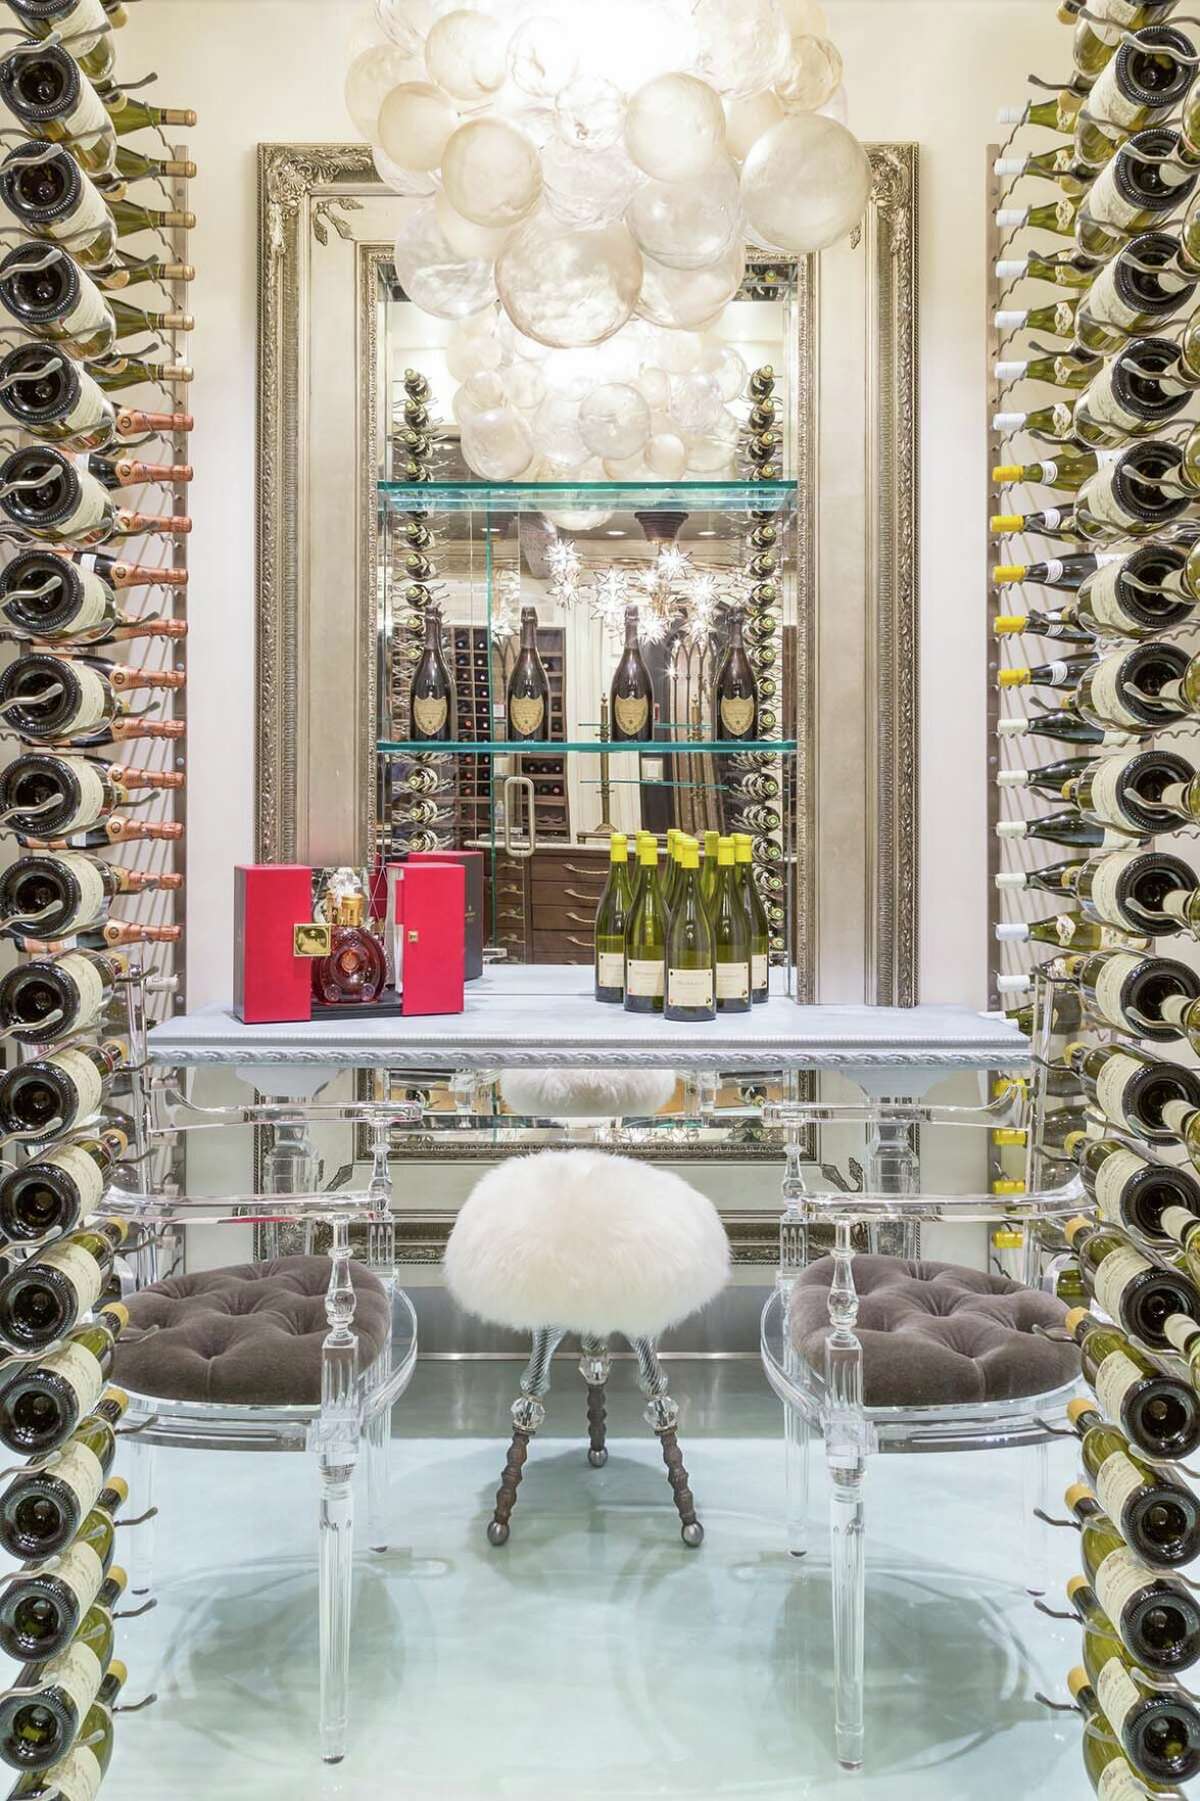 Summit Wine Cellars partnered with Kellie Burke Interiors to fabricate this sparkling wine cellar design in West Hartford. Glass, metal wine racks, and bubble chandeliers work to make this a festive wine storage solution.